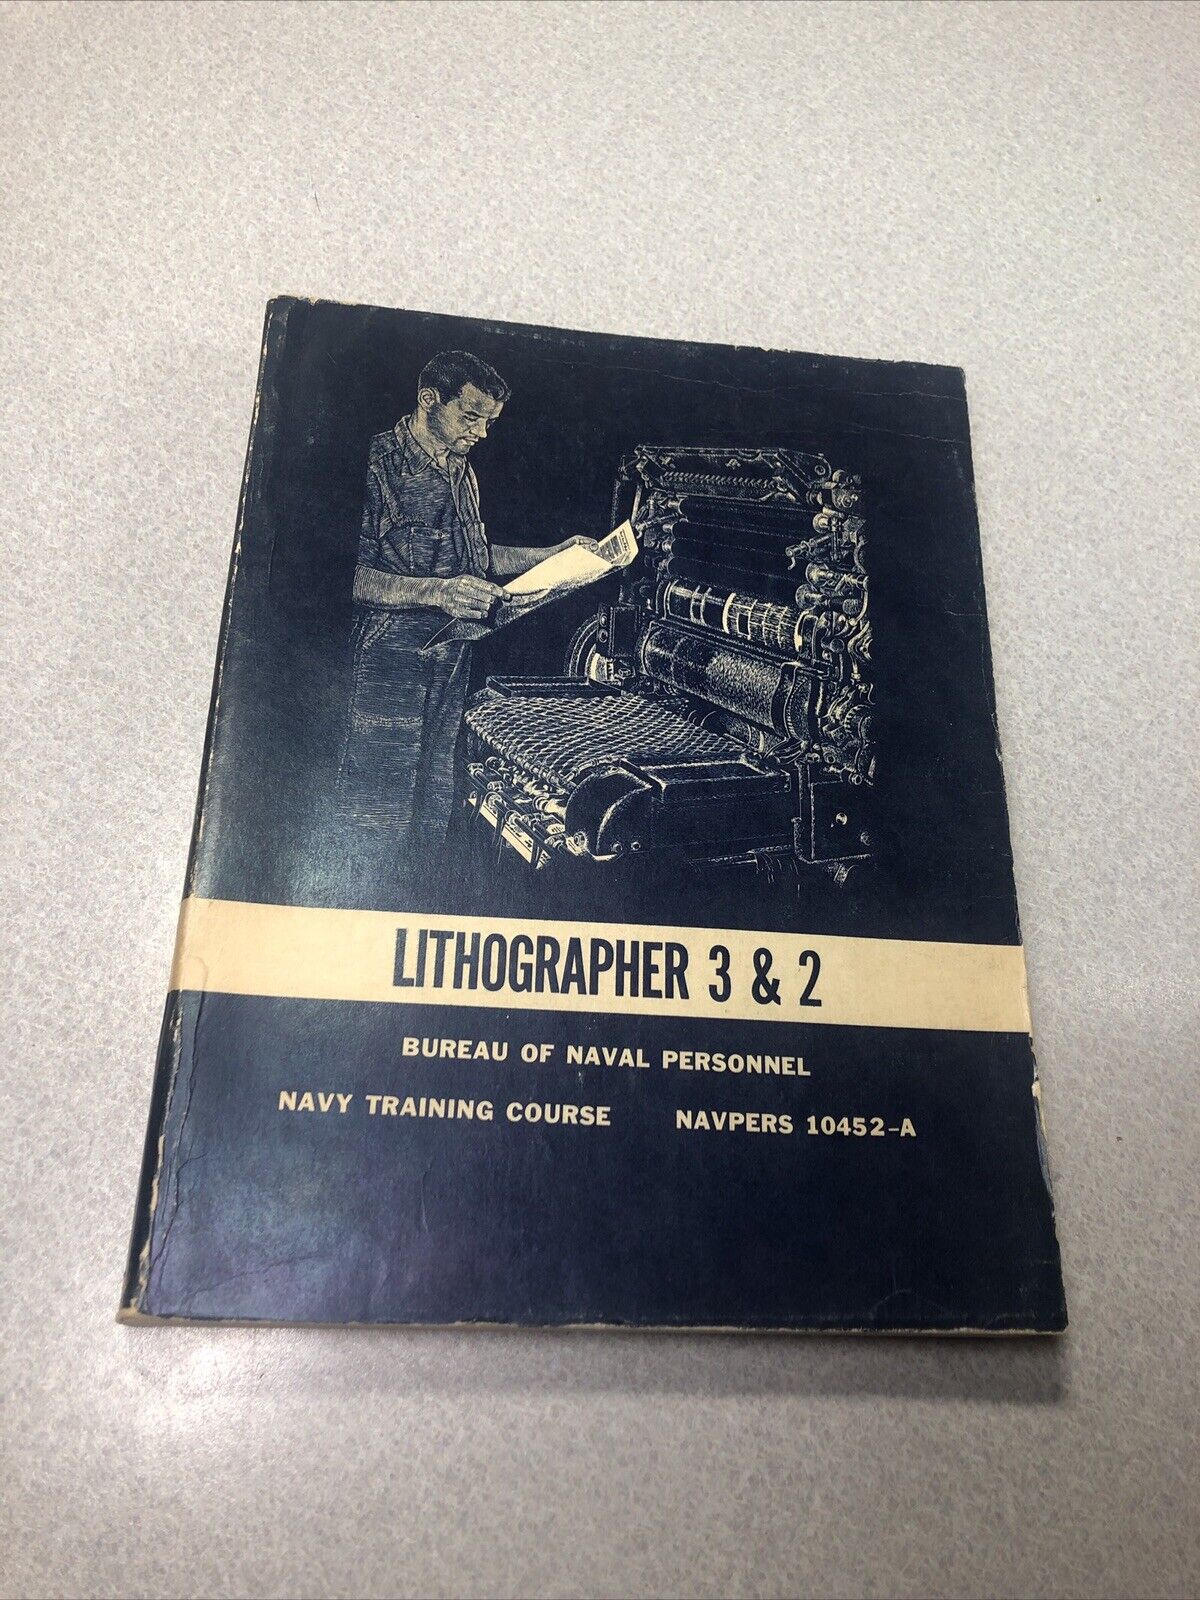 1963 US Navy Lithographer 3 & 2 Rate Training Manual NAVPERS 10452-A